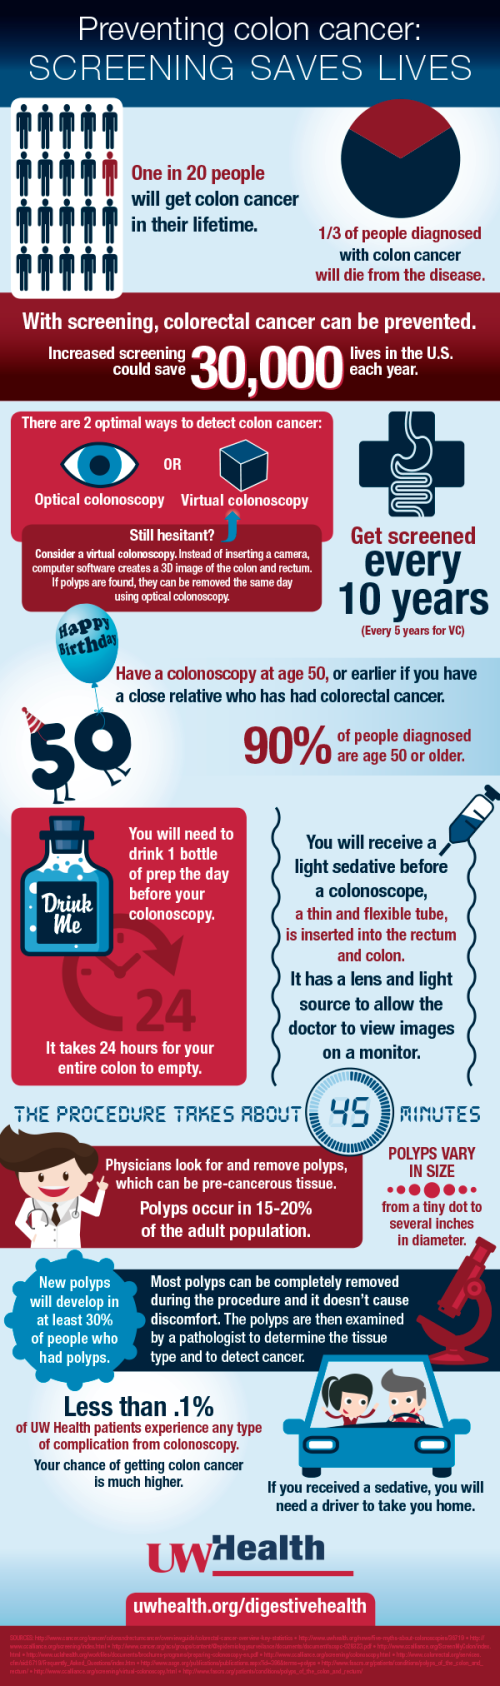 Preventing_Colon_Cancer_Infographic